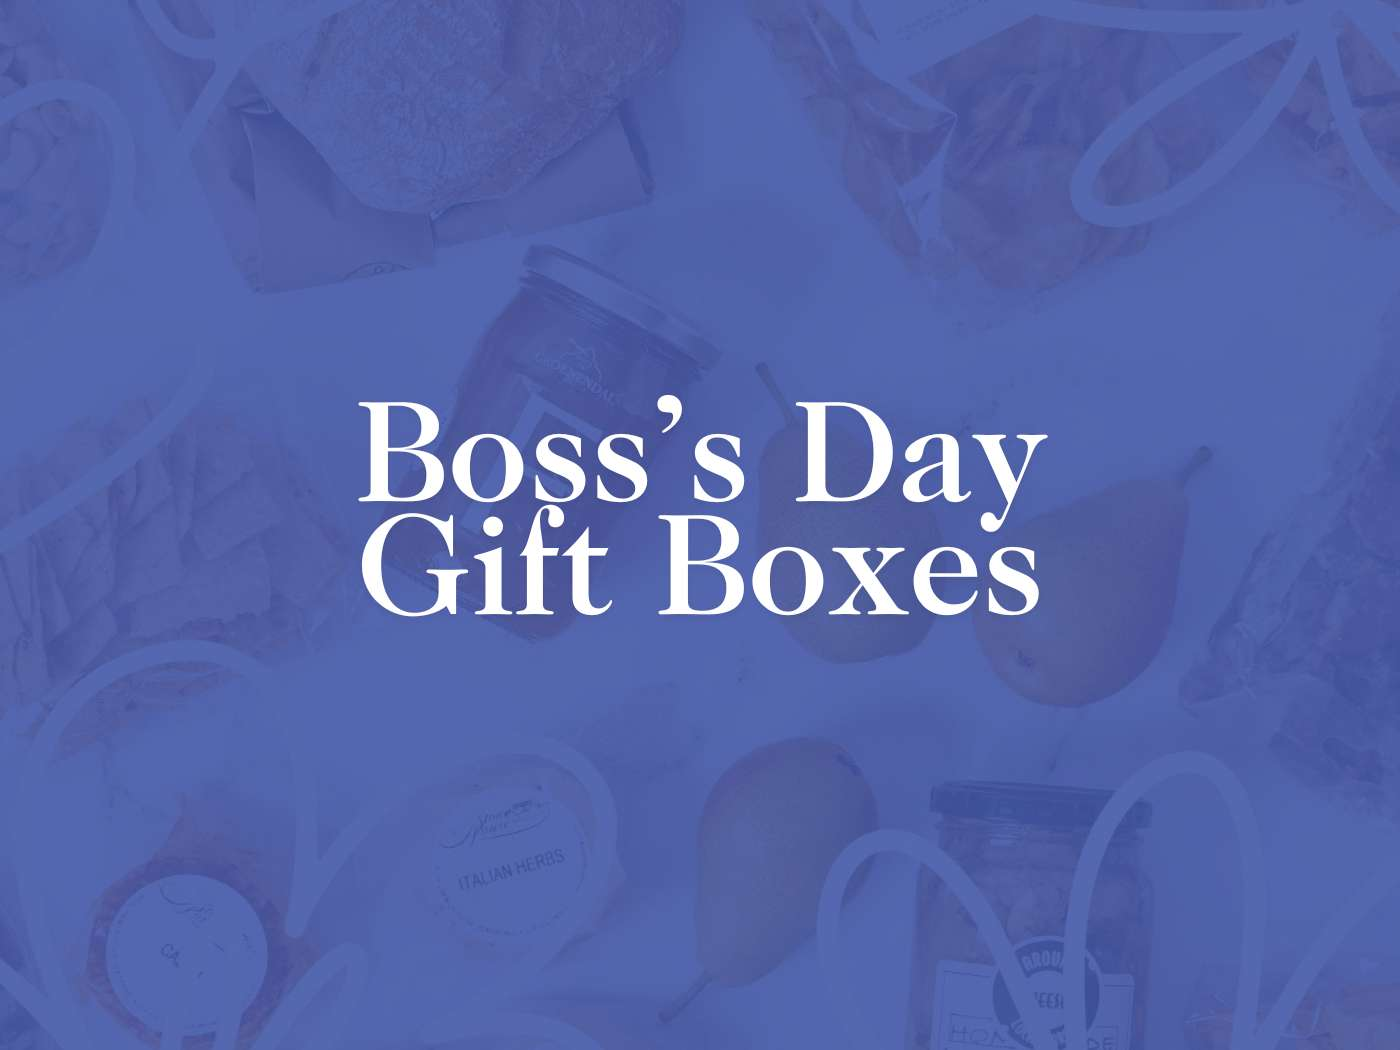 Monochromatic blue overlay on a selection of Boss's Day Gift Boxes, elegantly presented by Fabulous Flowers and Gifts.